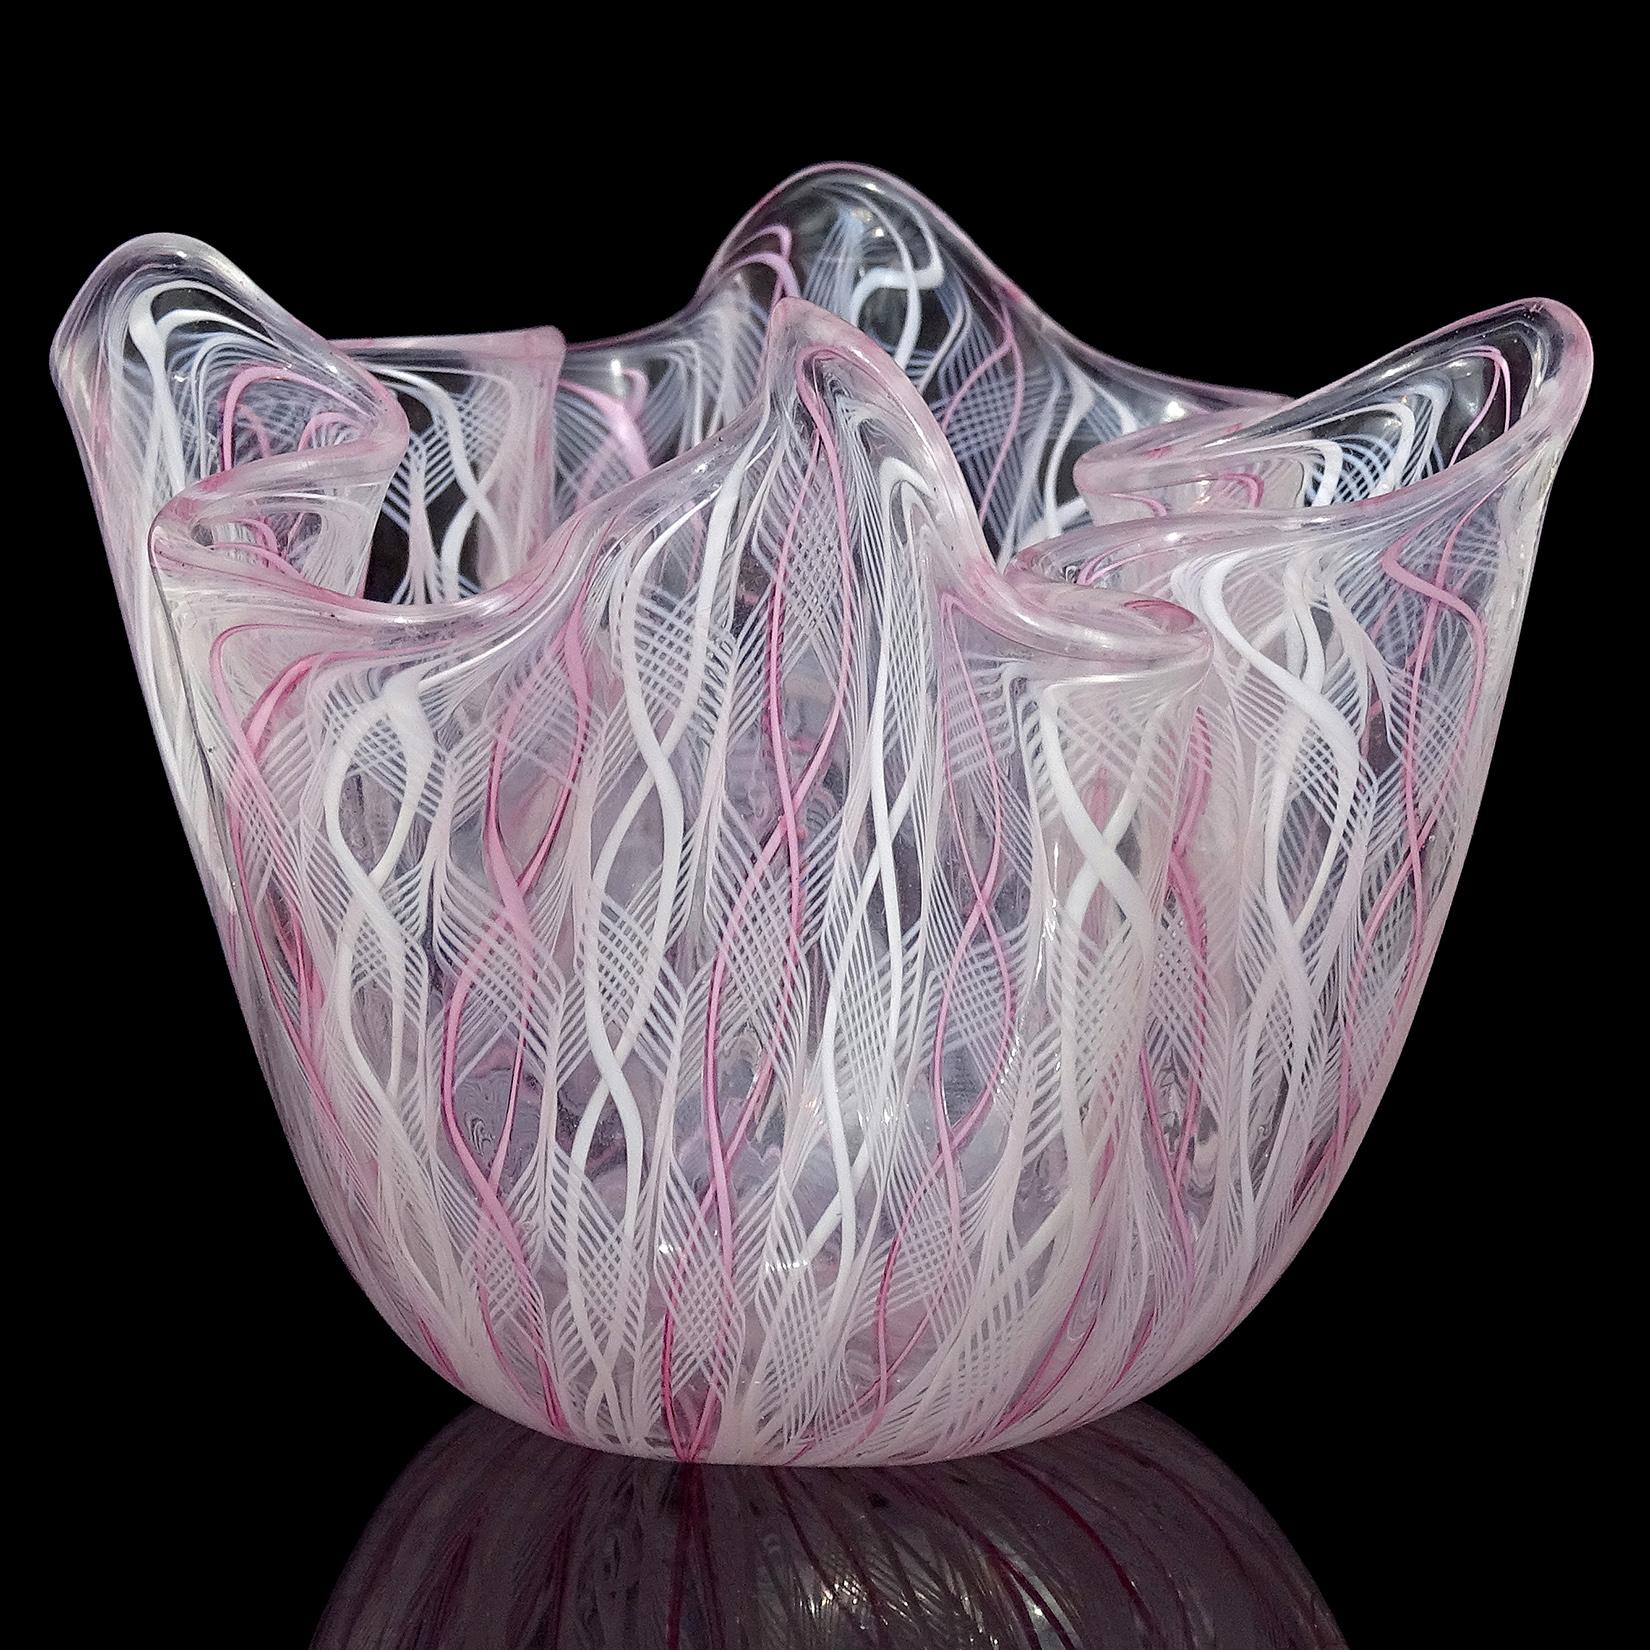 Beautiful vintage Murano hand blown pink and white Italian art glass fazzoletto handkerchief vase. Documented to Fulvio Bianconi and Paolo Venini, for Venini. The piece is fully signed 